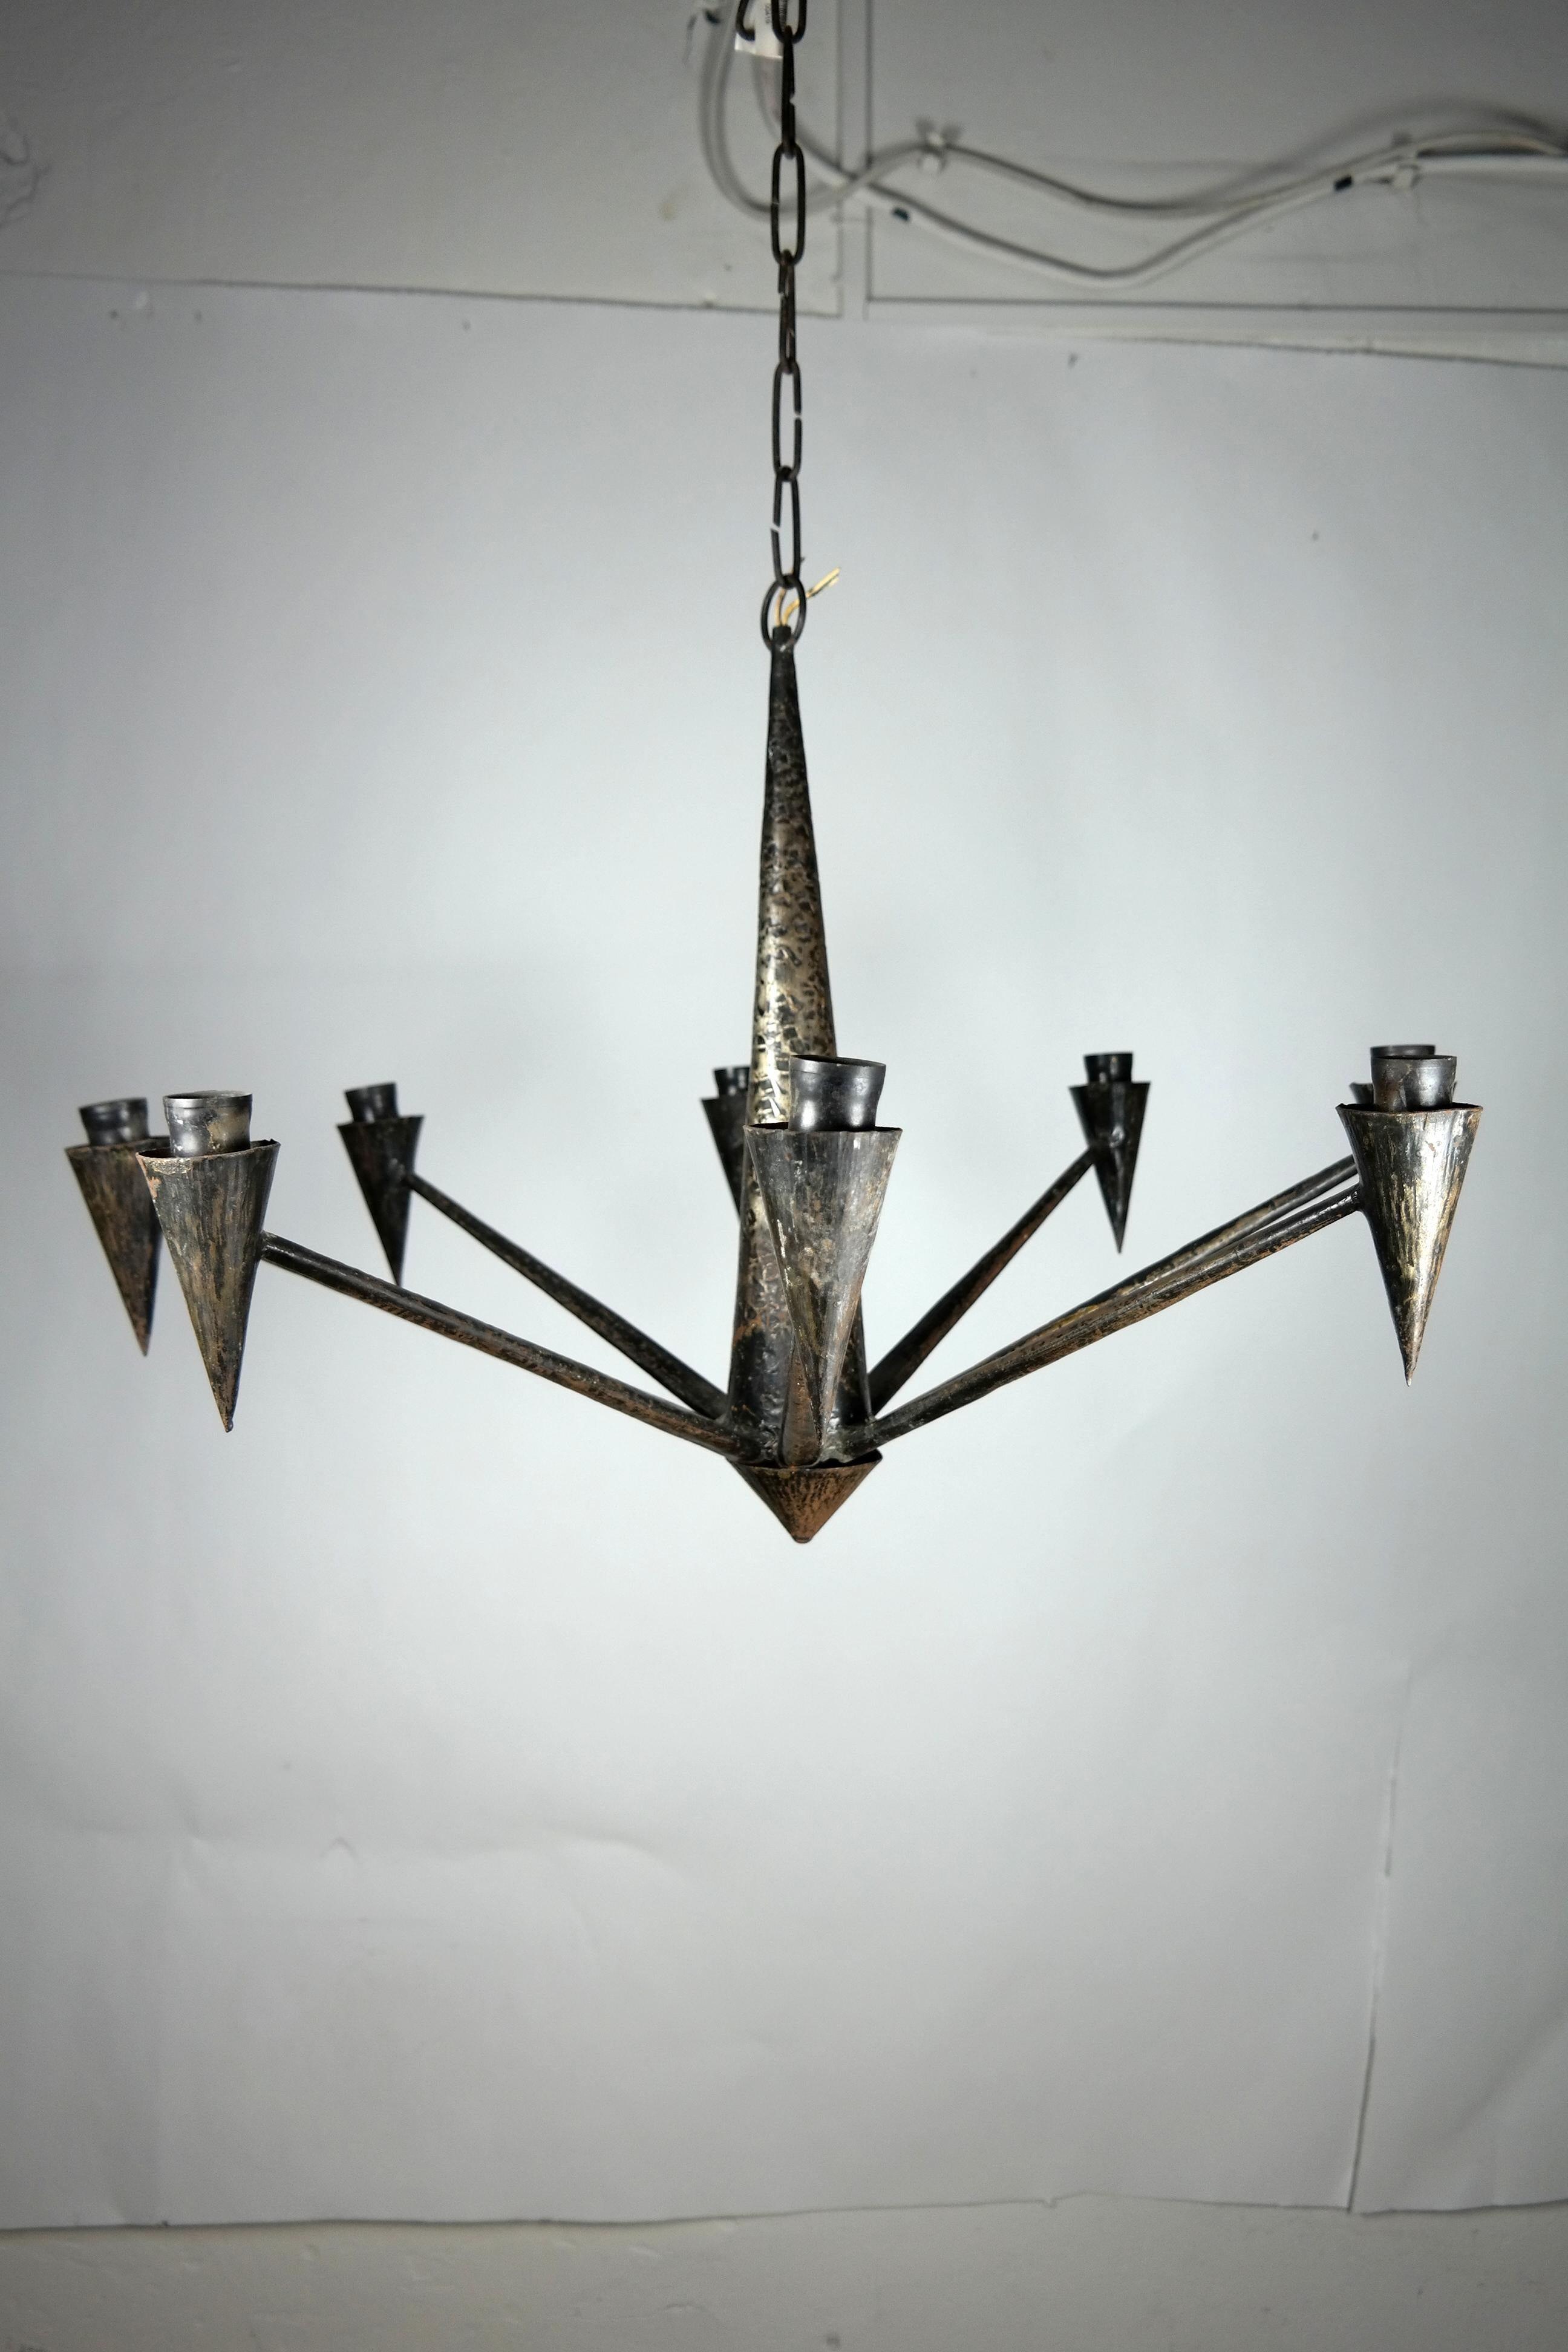 This 1970s hand-hammered iron chandelier features 8 arms with dark black patina. It's in original condition, working but in need of an electric upgrade. Aside from some minor rusting, it's in good condition.
  